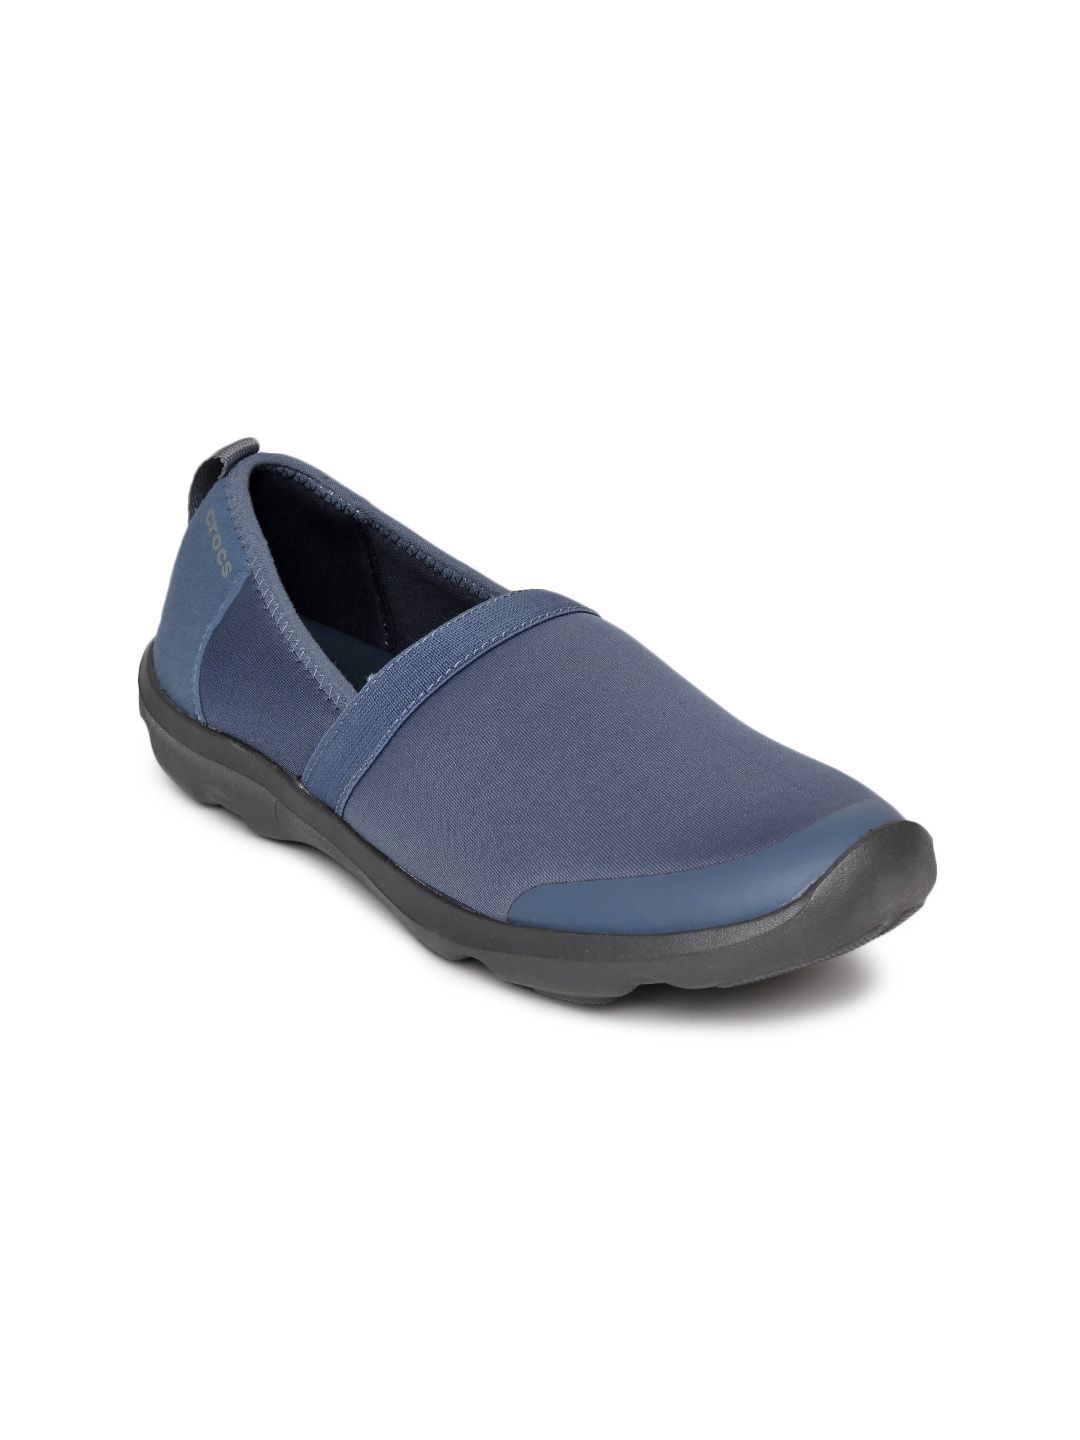 Crocs Duet Busy Day  Women Blue Slip-Ons Price in India